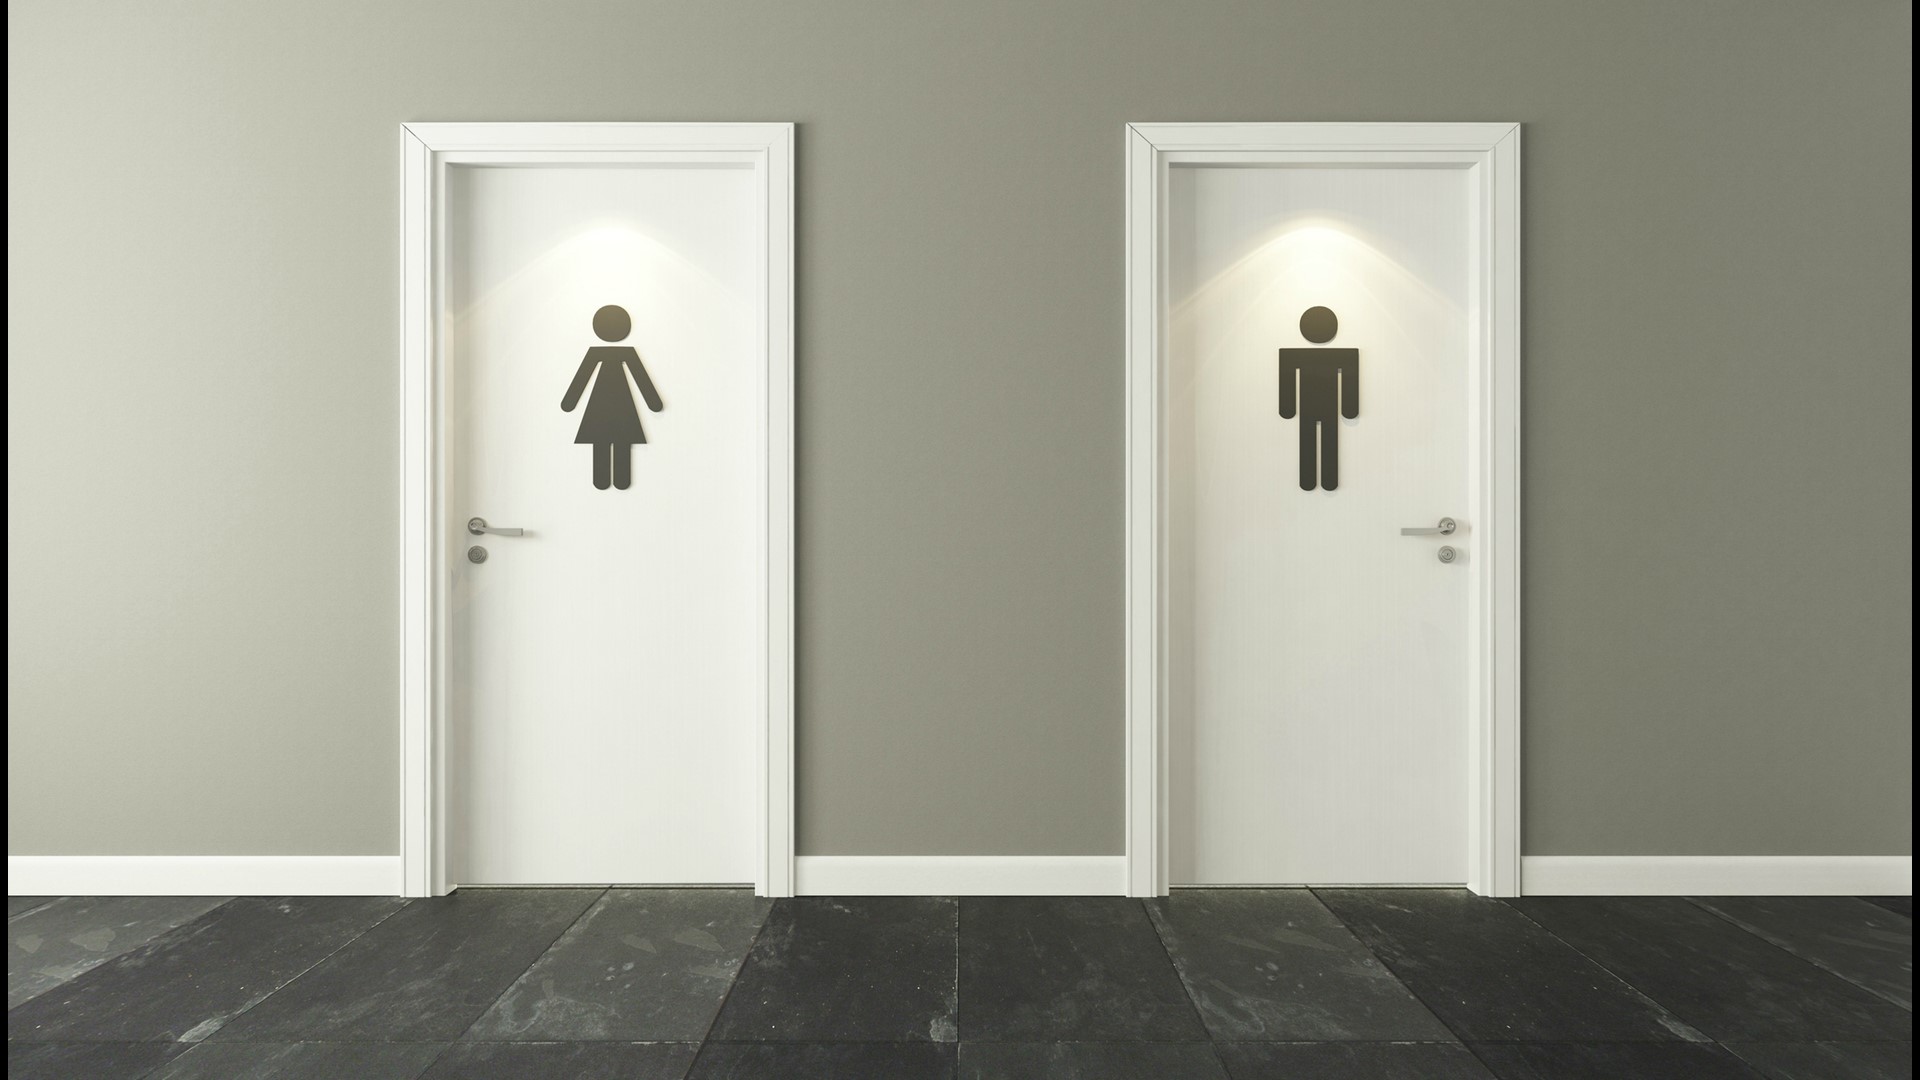 An appeals court upheld a court ruling that transgender students in Indiana must have access to the bathrooms and locker rooms with for their gender identities.